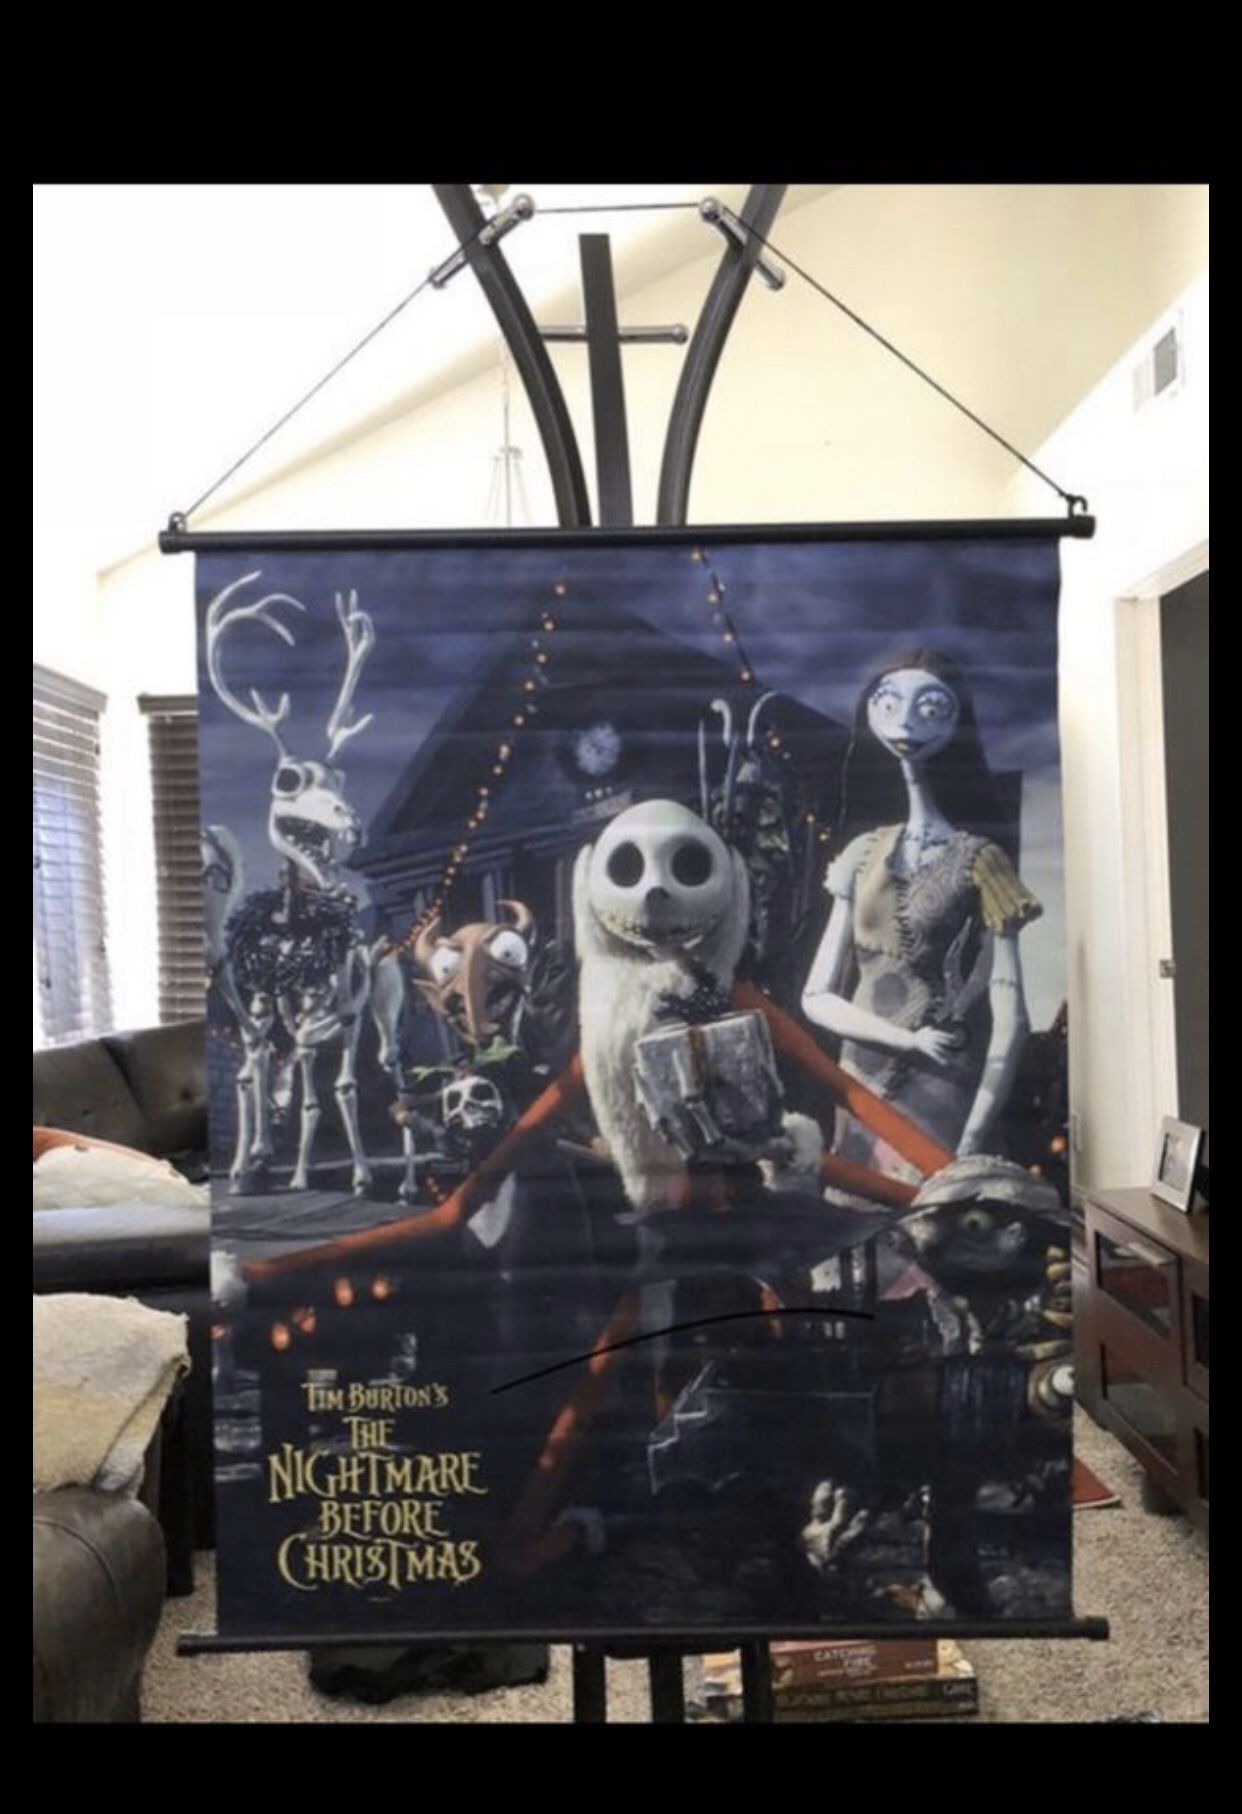 NECA ORIGINAL The Nightmare Before Christmas 27” x 34” Fabric Wall Scroll Poster LIMITED EDITION RARE DISCONTINUED - BULK LOT WHOLESALE - HALLOWEEN S